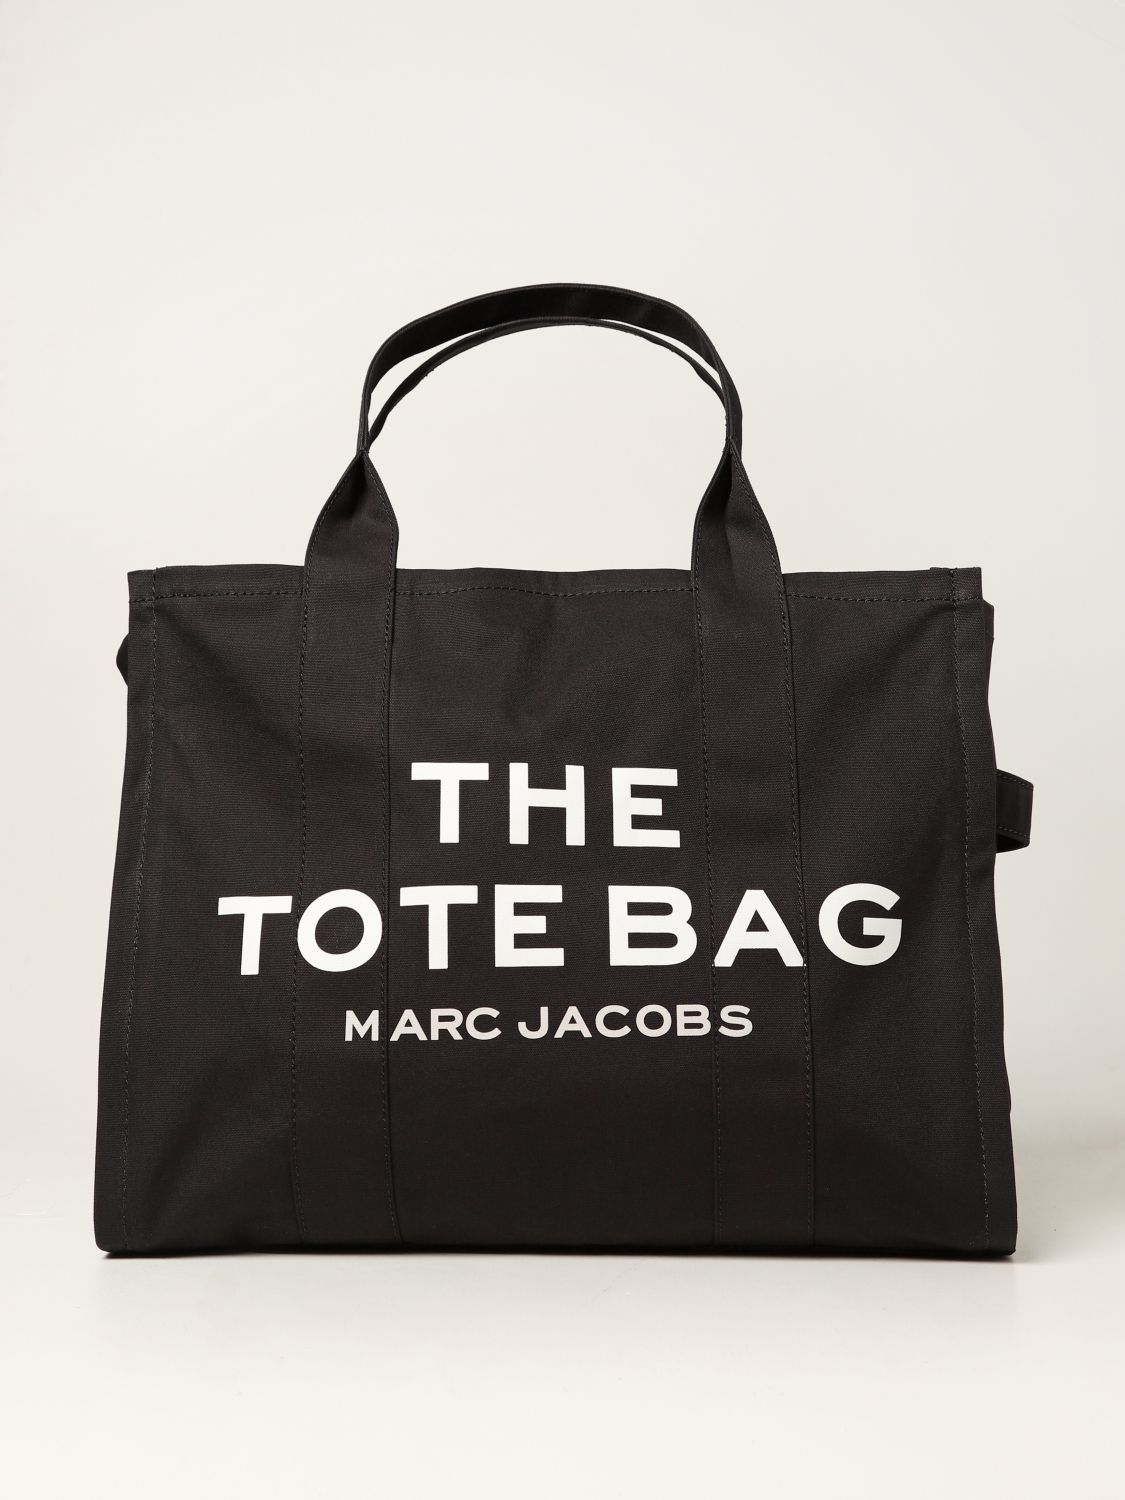 MARC JACOBS: The XL Tote Bag with logo - Black | Marc Jacobs tote bags ...